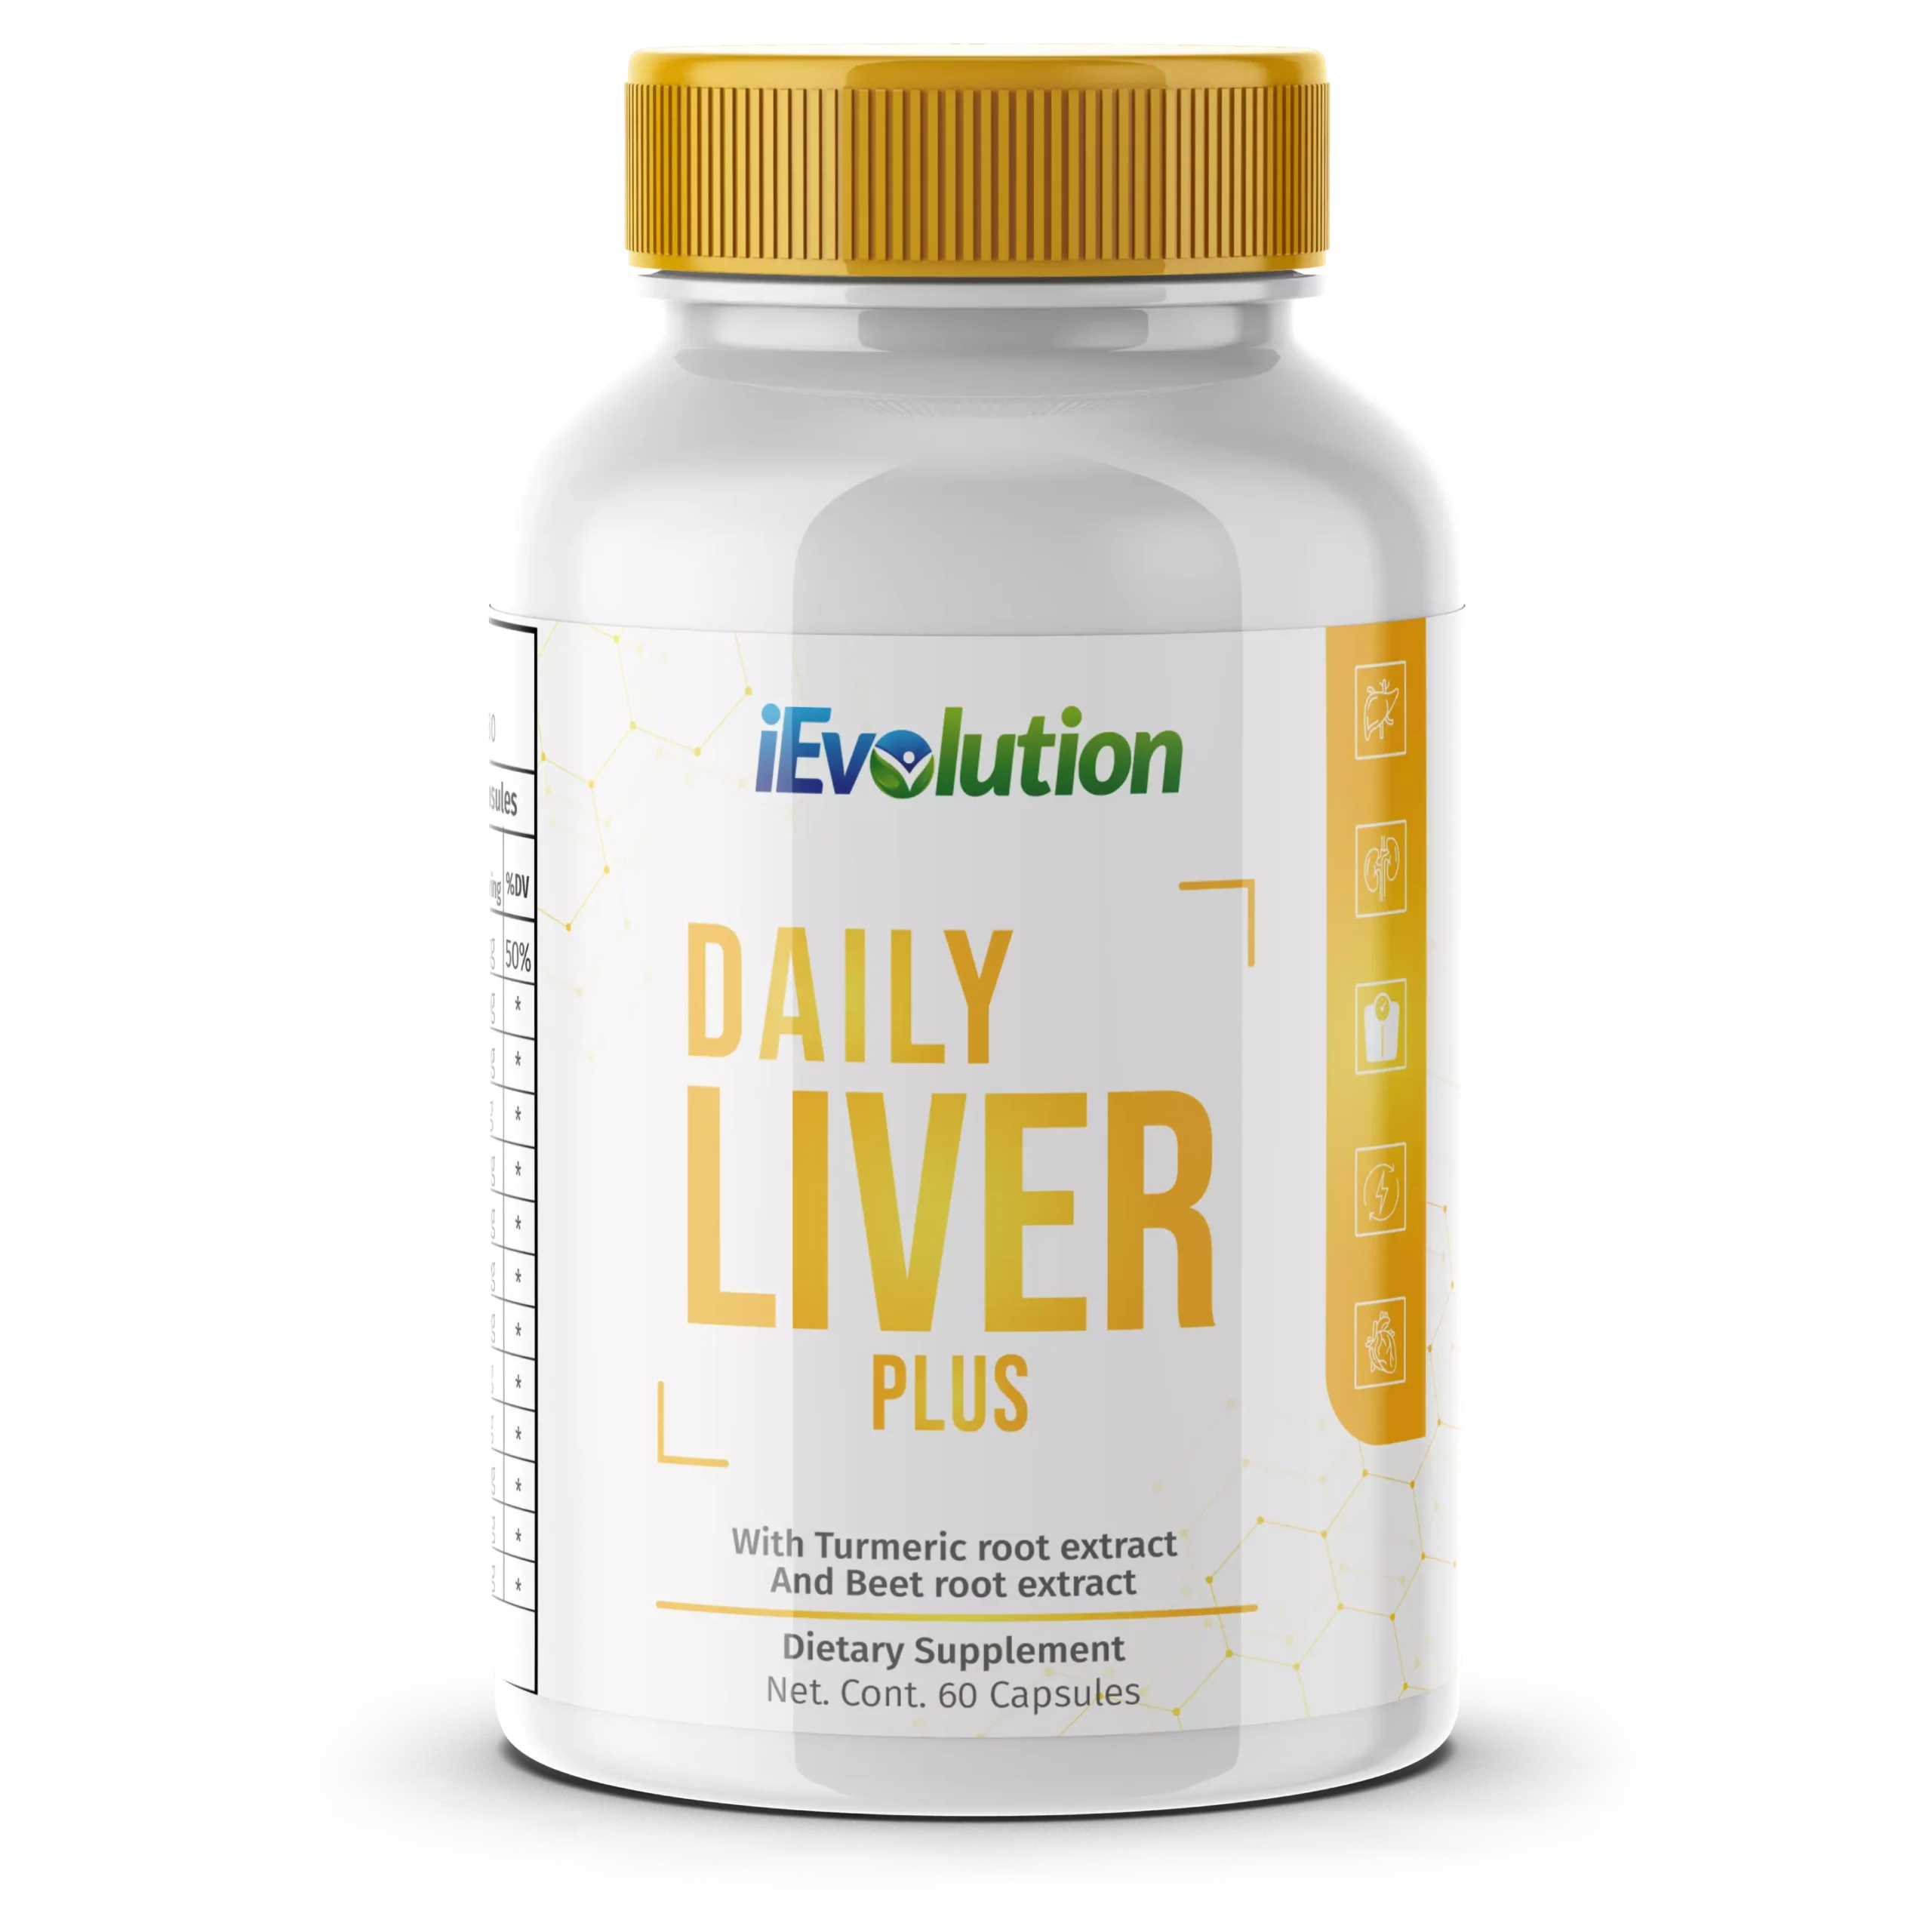 Daily Liver Plus - Liver Detox, Cleanse, Healthy Liver - 60 capsules.